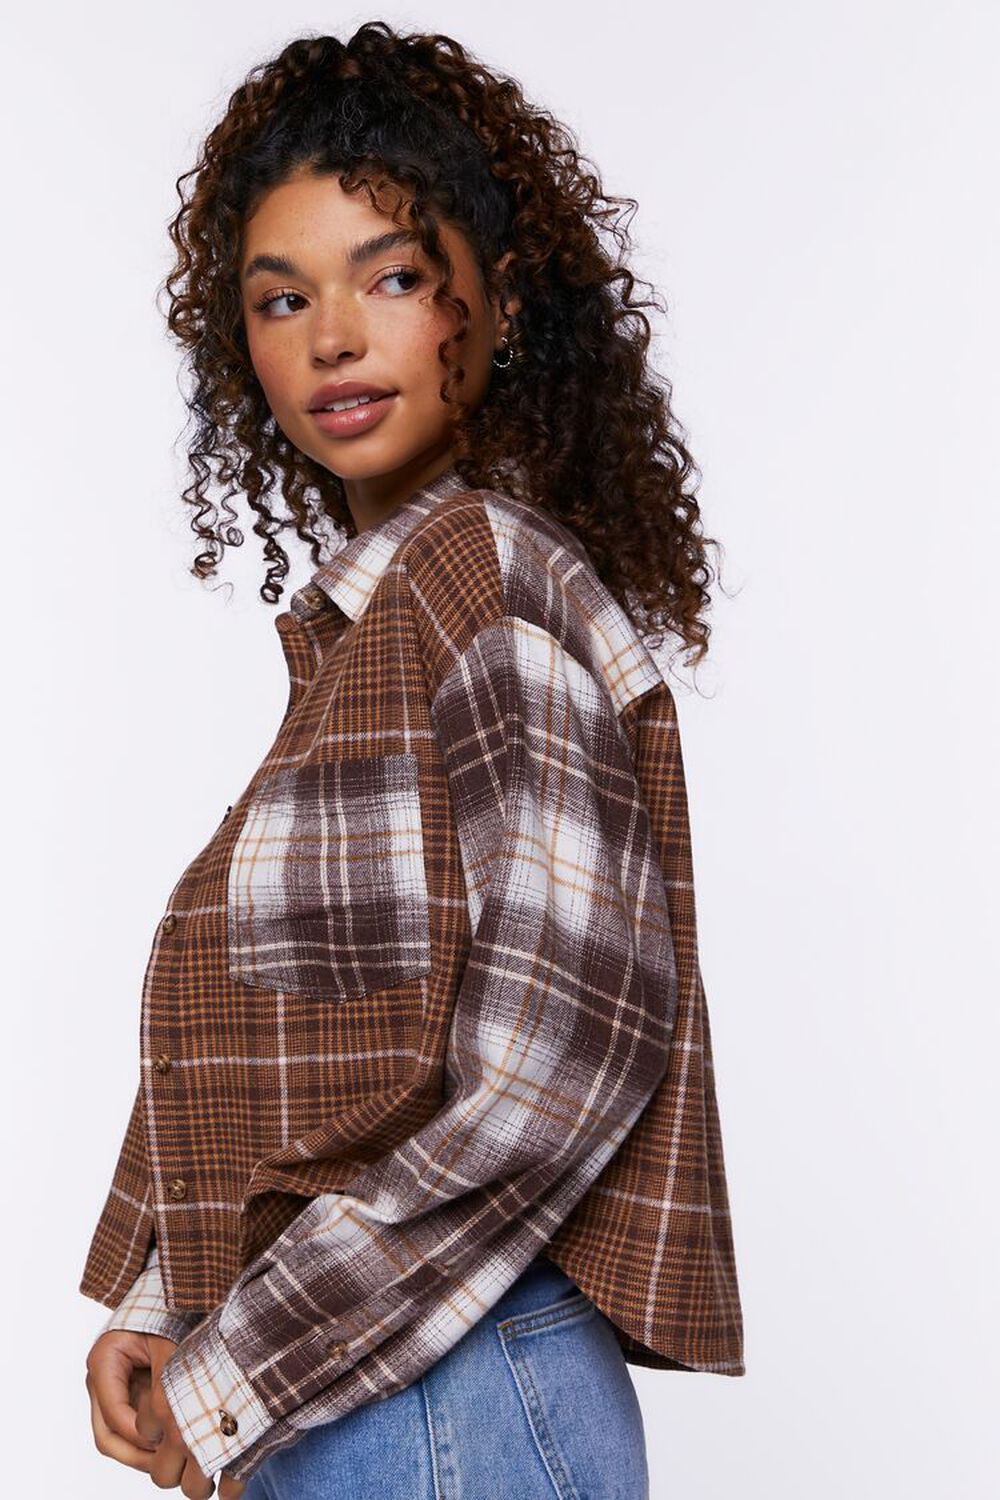 CAPPUCCINO Reworked Plaid Boxy Flannel Shirt, image 2